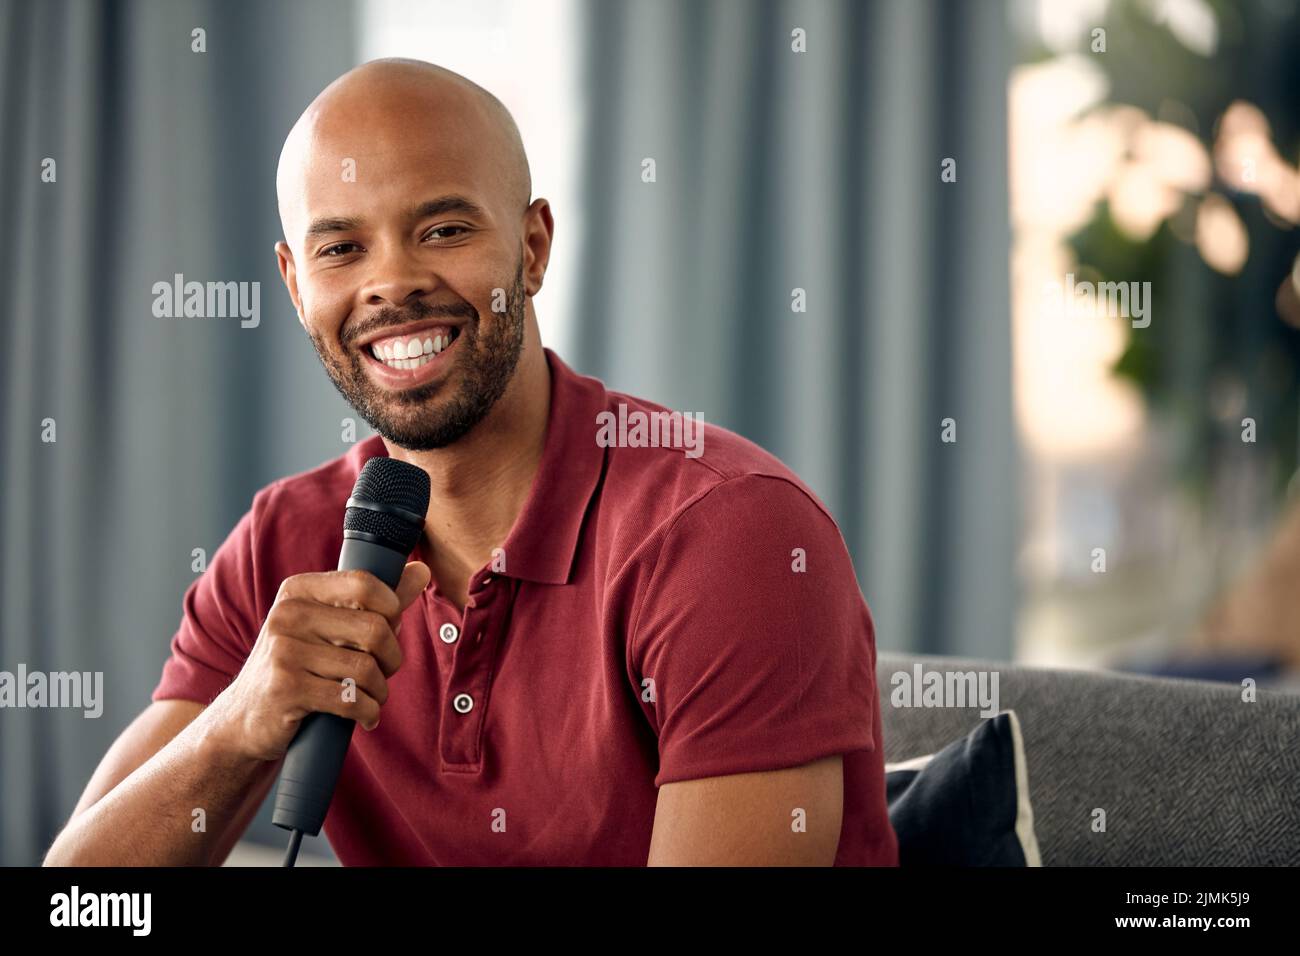 Hes quite the talker. a young man sitting on a sofa while speaking over a microphone. Stock Photo